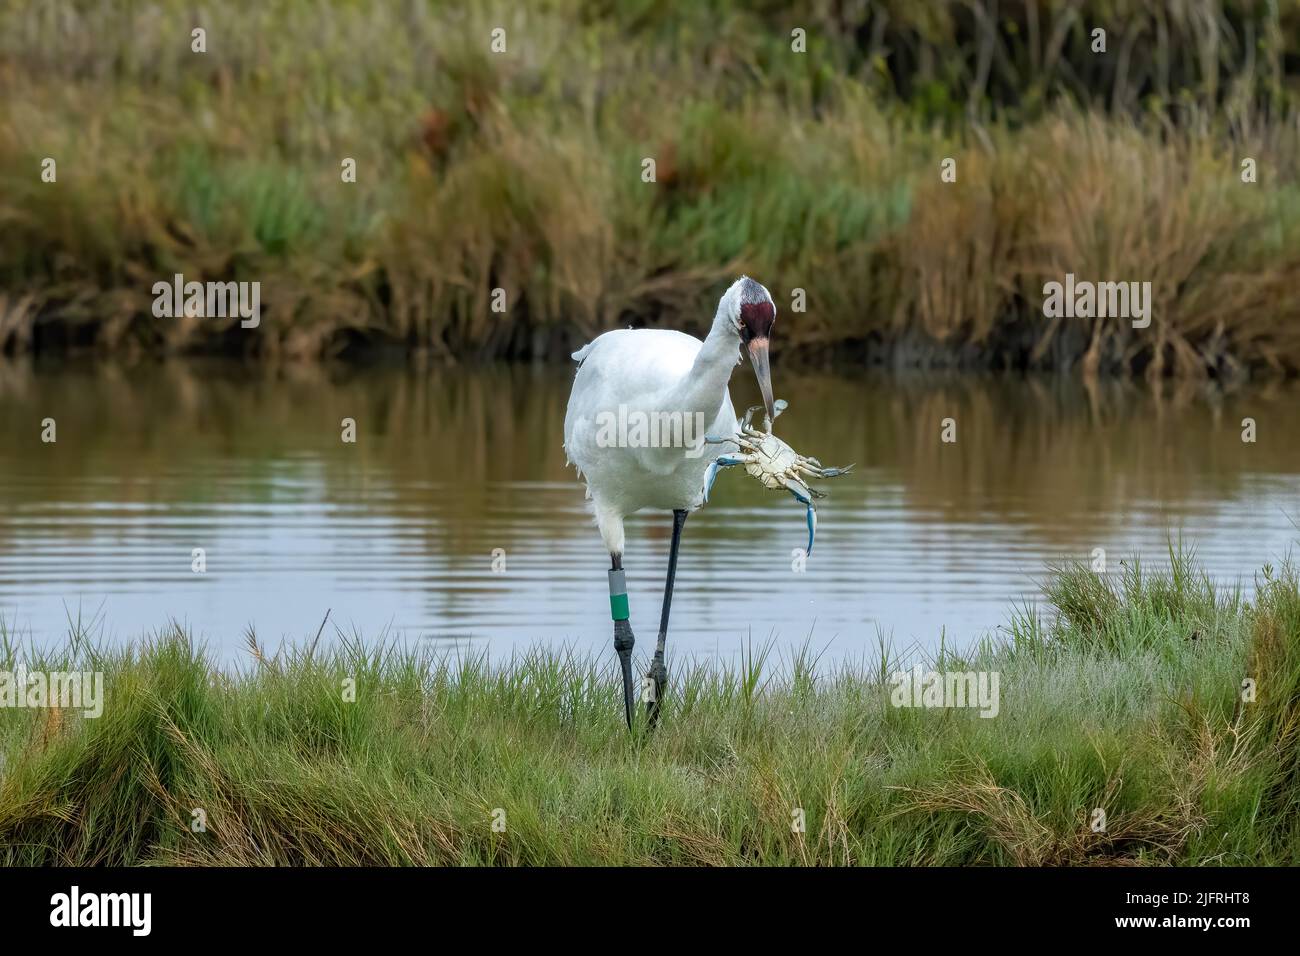 A Whooping Crane, Grus americana, catching an Atlantic Blue Crab in the Aransas National Wildlife Refuge in Texas. Stock Photo